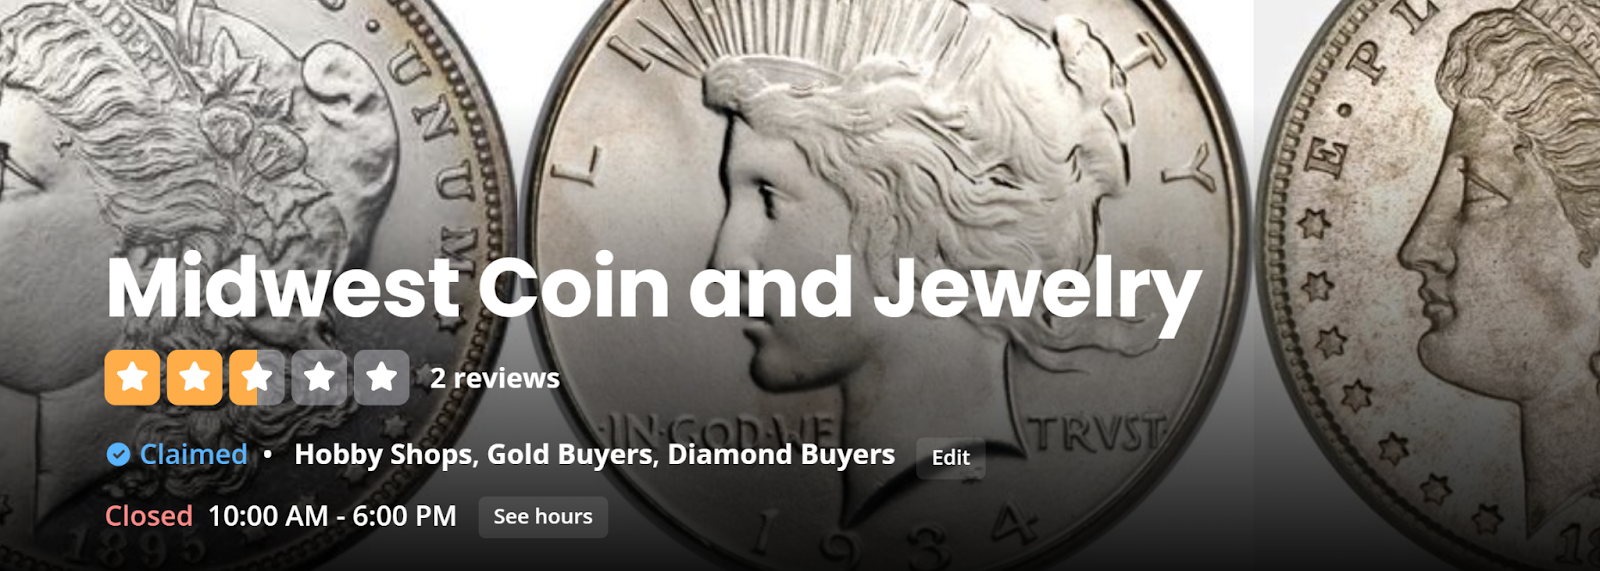 midwest coin and jewelry